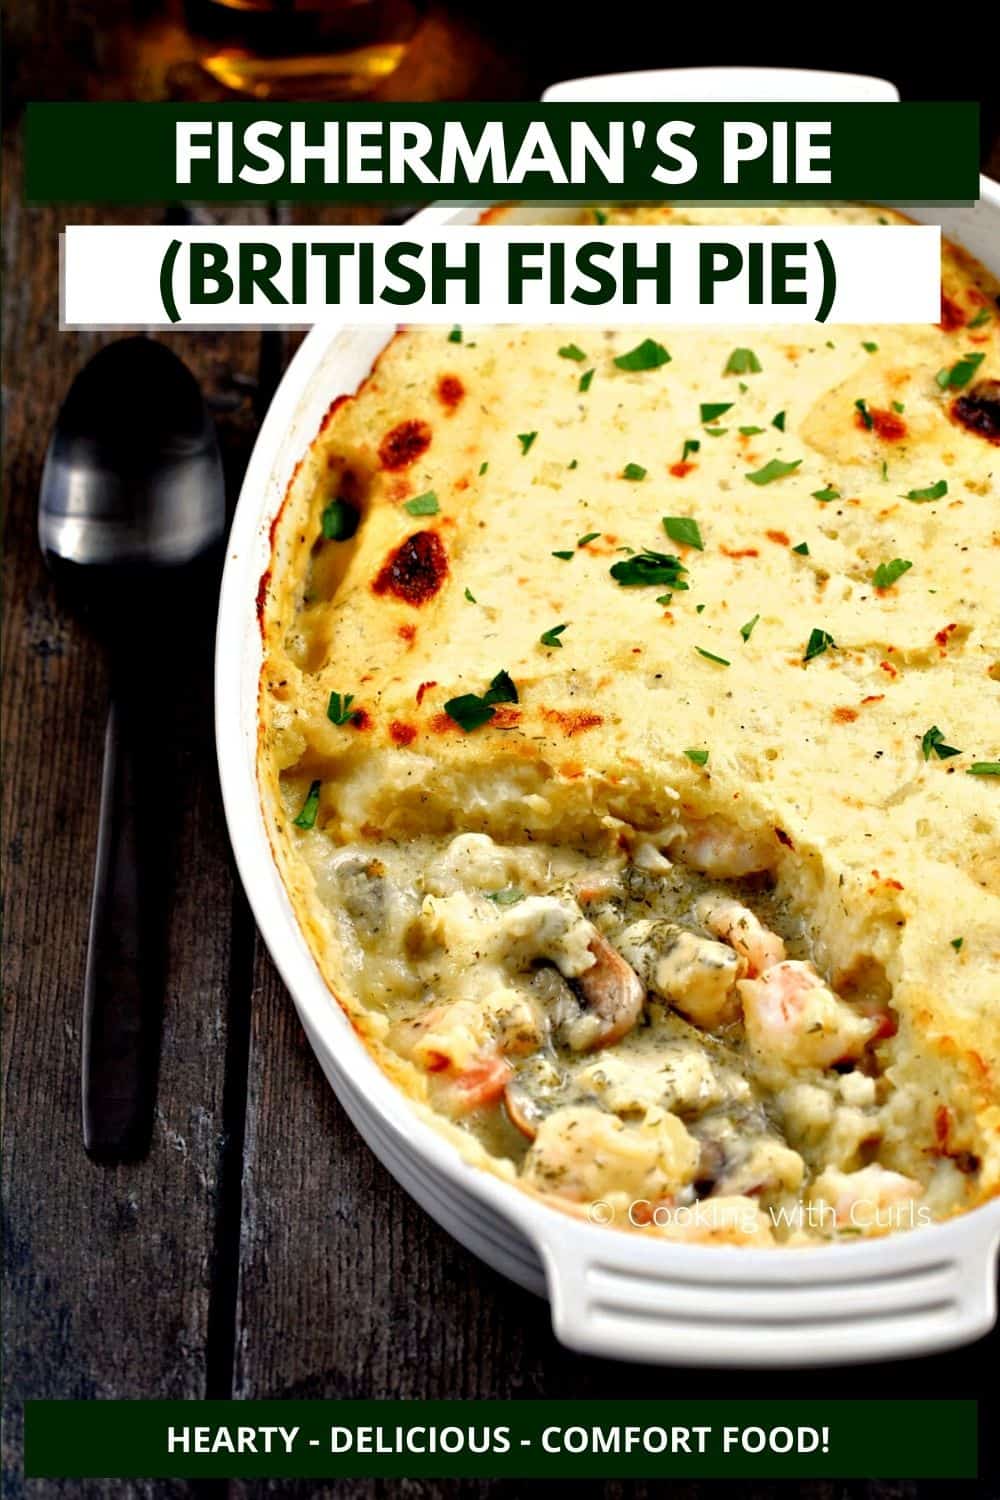 Mashed potato topped fish pie in an oval baking dish with the front quarter of the ingredients removed and title graphic across the top.